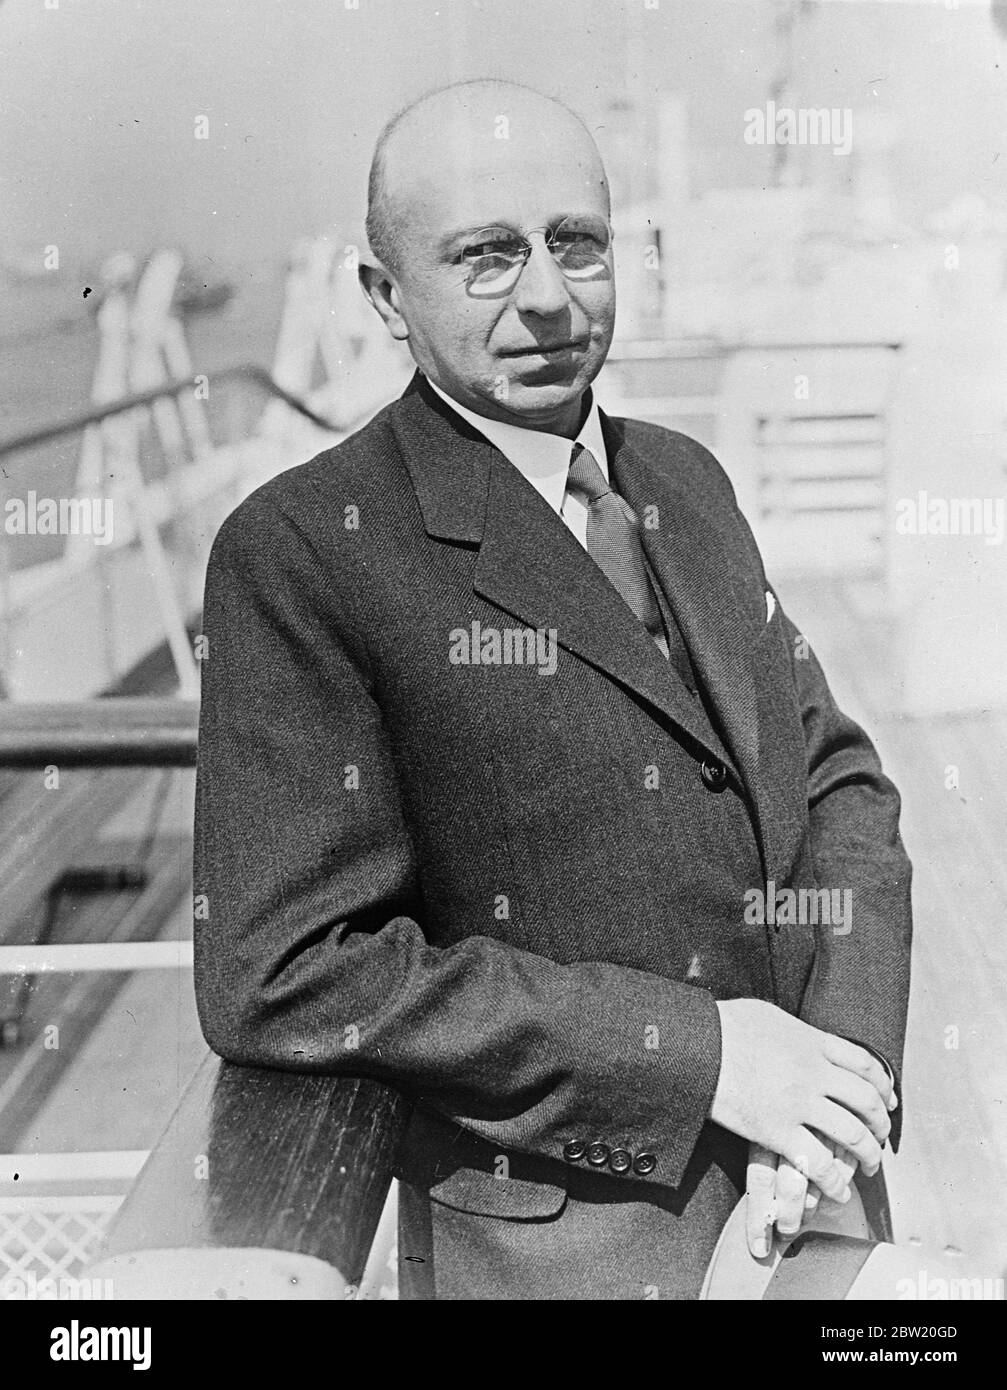 An attempt has been made with a bomb on the life of Colonel Adam Koc, leader of the Polish National Union Party, at his villa at Swidry, near Warsaw. Colonel was Undersecretary of Finance in three Cabinets. A recent picture of him. 19 July 1937 Stock Photo